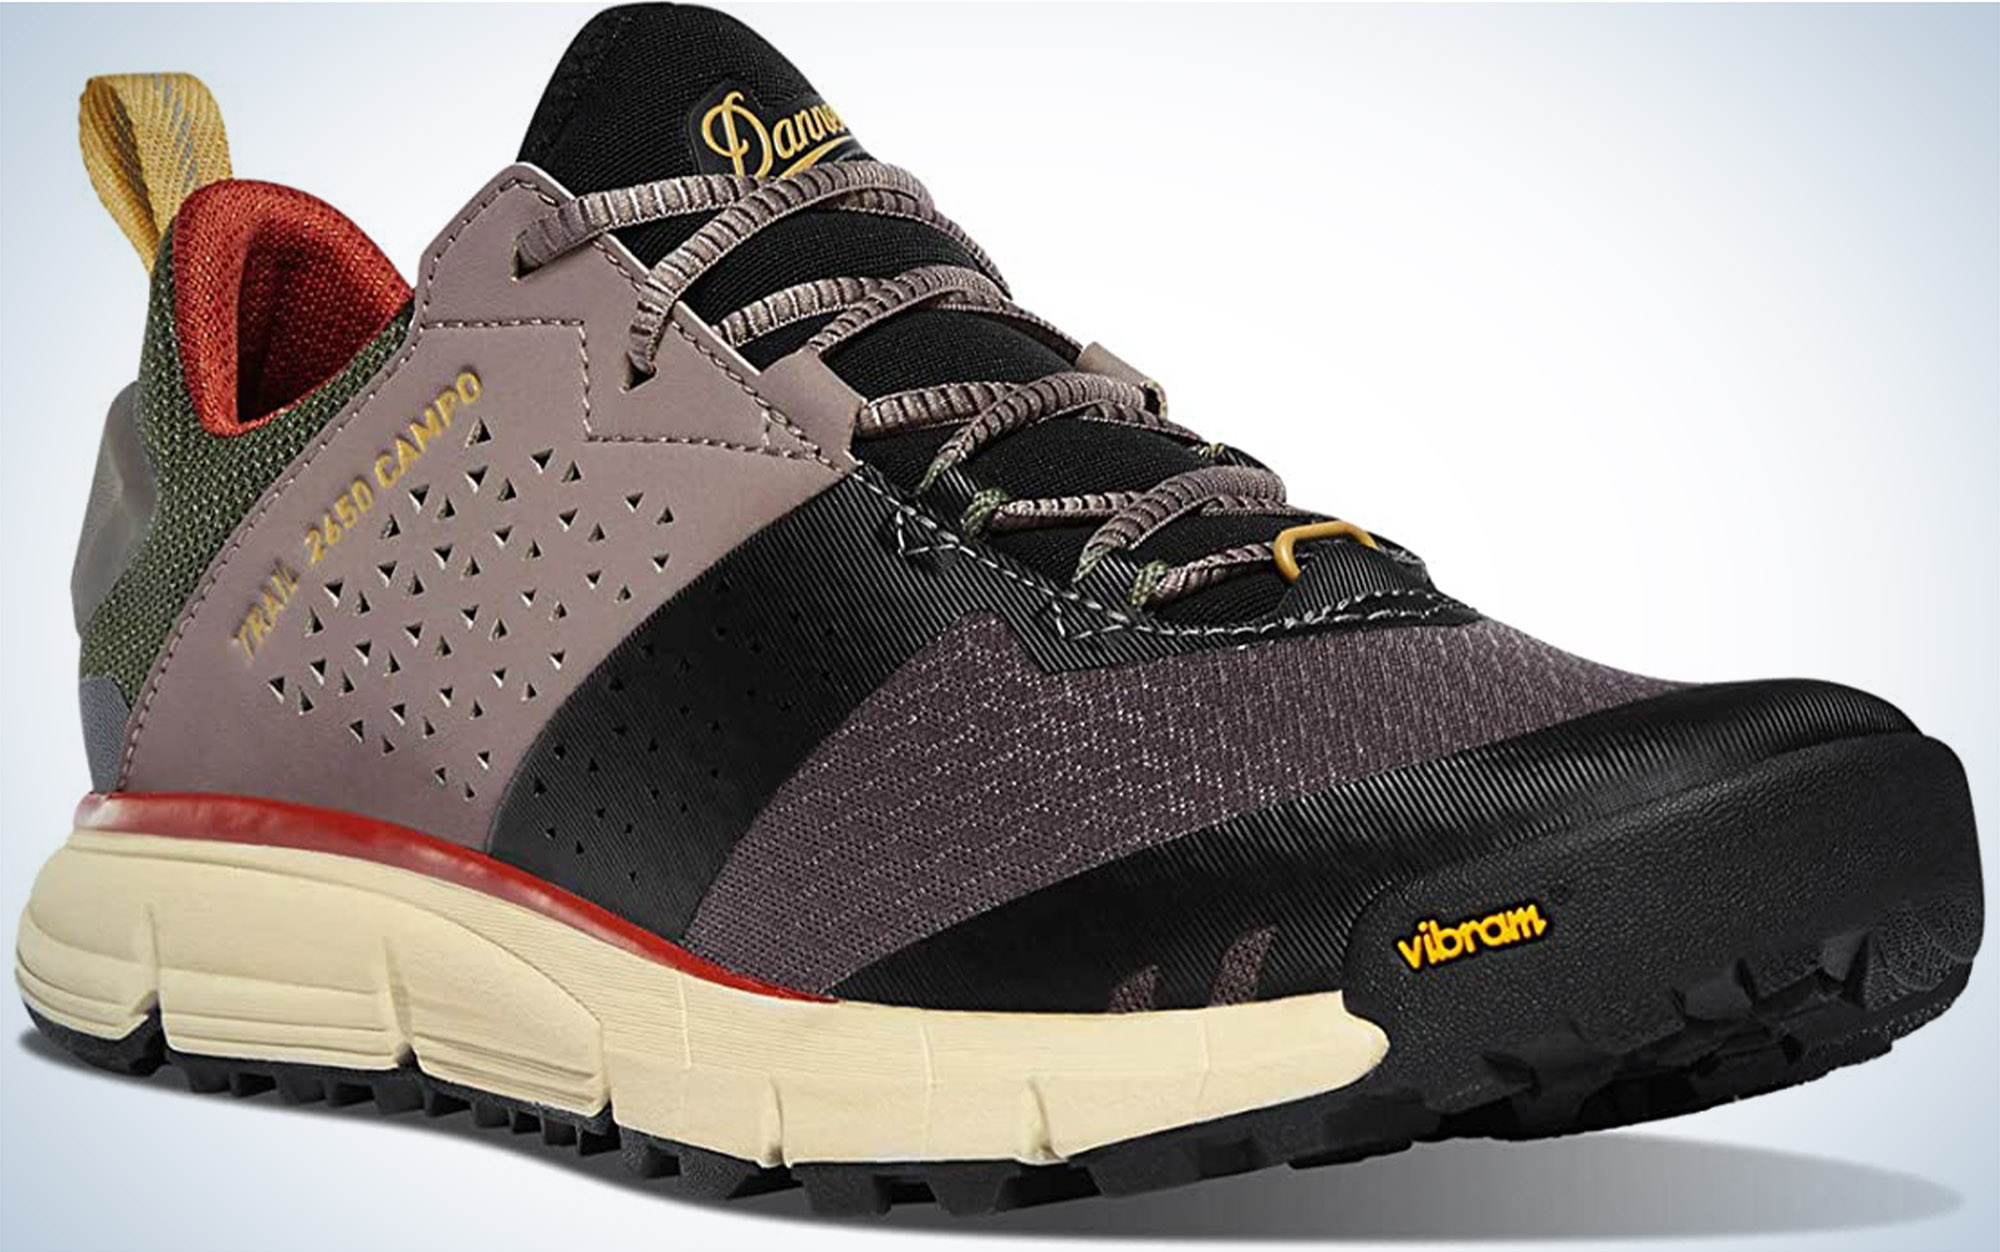 We tested the Danner Trail 2650 Campo GTX.